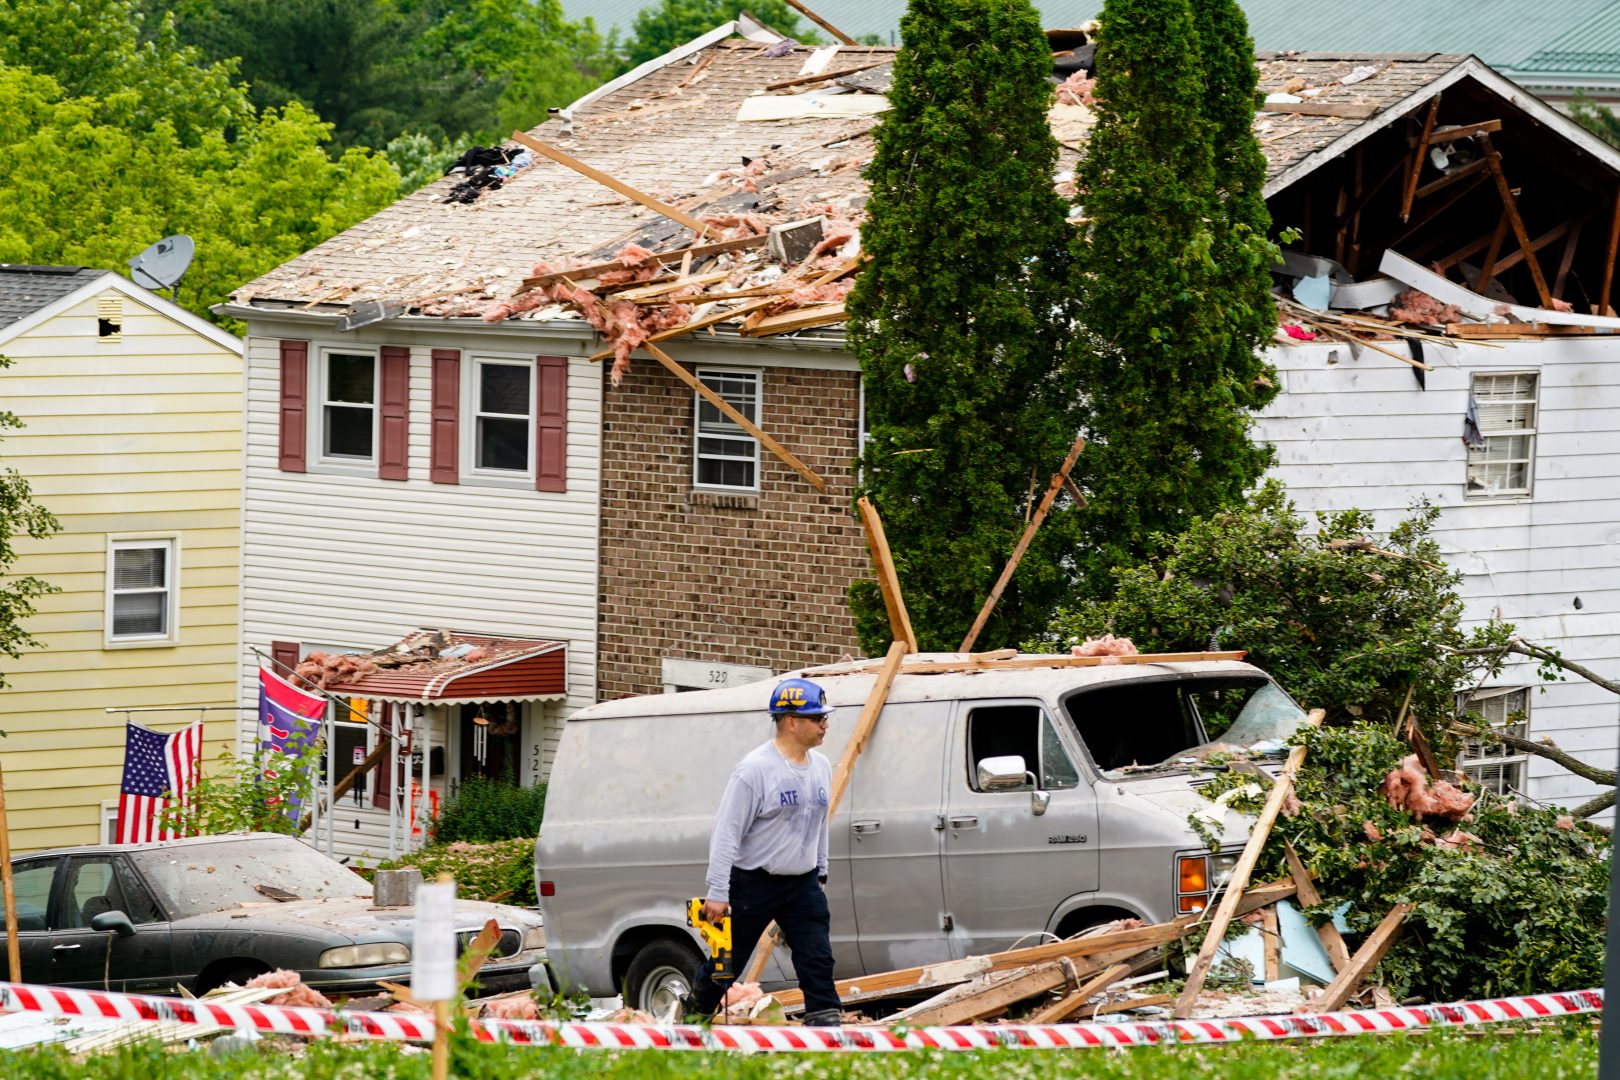 An investigator moves through the scene of a deadly explosion in a residential neighborhood in Pottstown, Pa., Friday, May 27, 2022. (AP Photo/Matt Rourke)